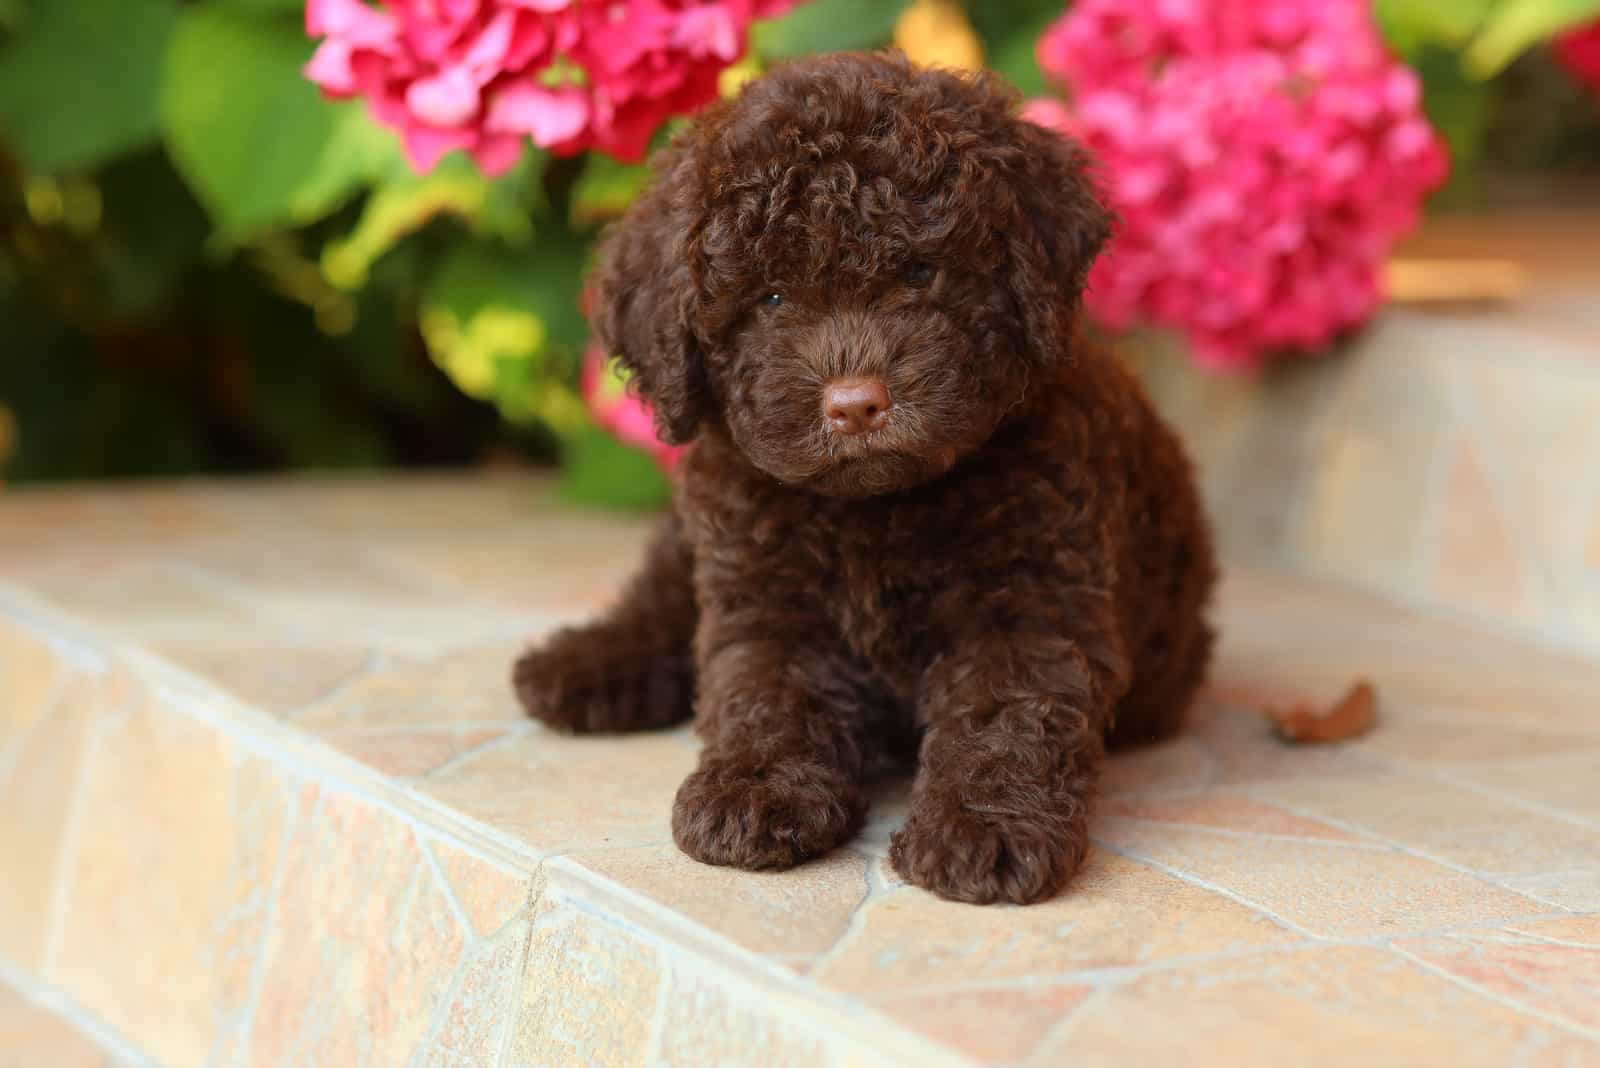 puppy of the lagotto romagnolo breed lying outdoor on the floor